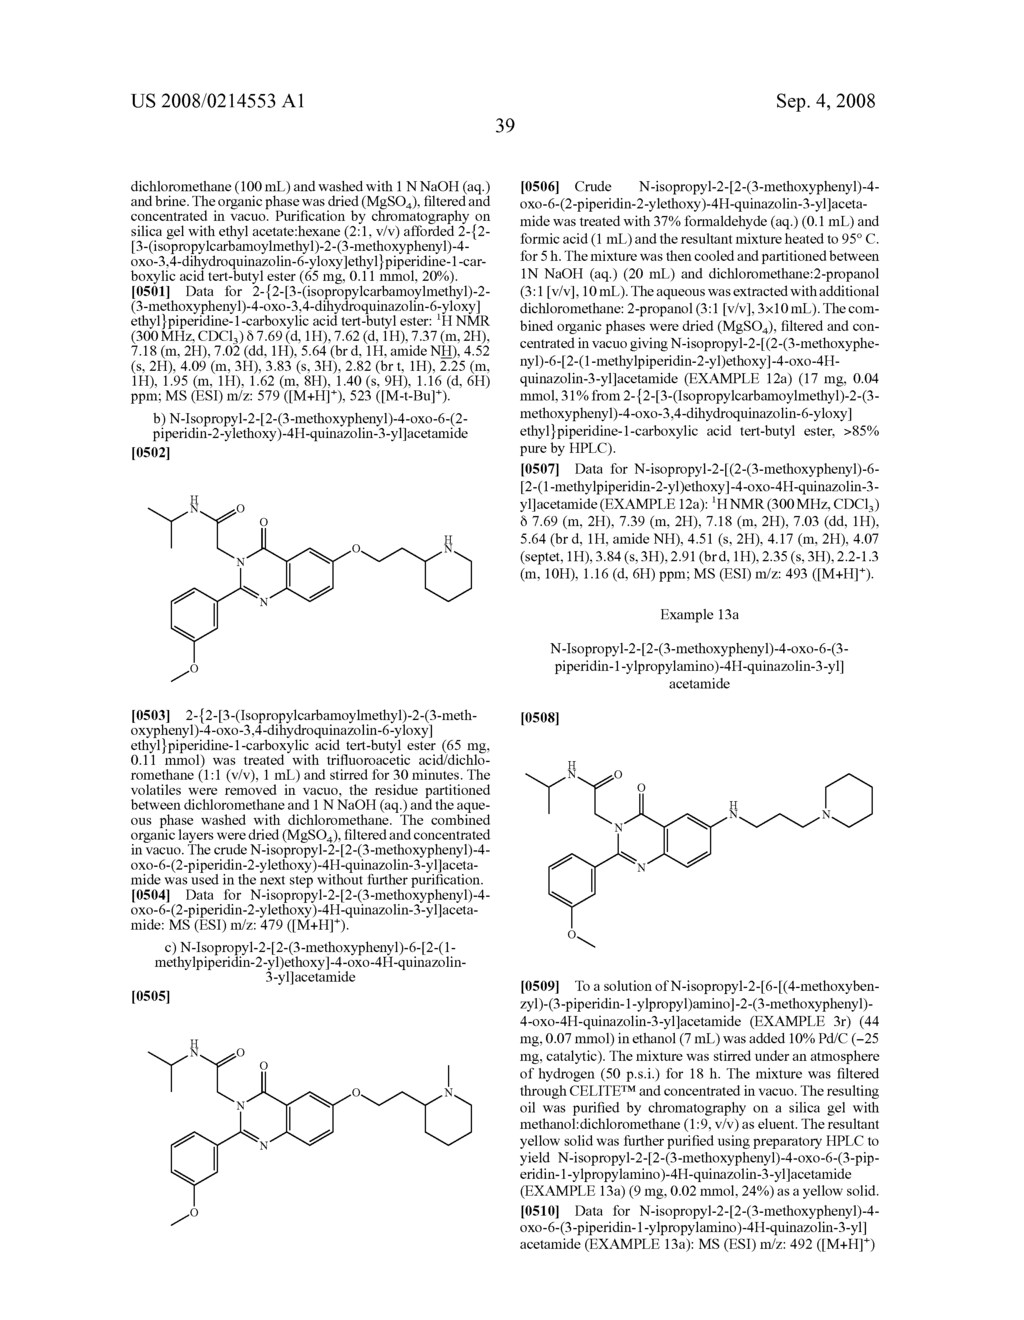 2-(4-Oxo-4H-Quinazolin-3-Yl) Acetamides and Their Use as Vasopressin V3 Antagonists - diagram, schematic, and image 40